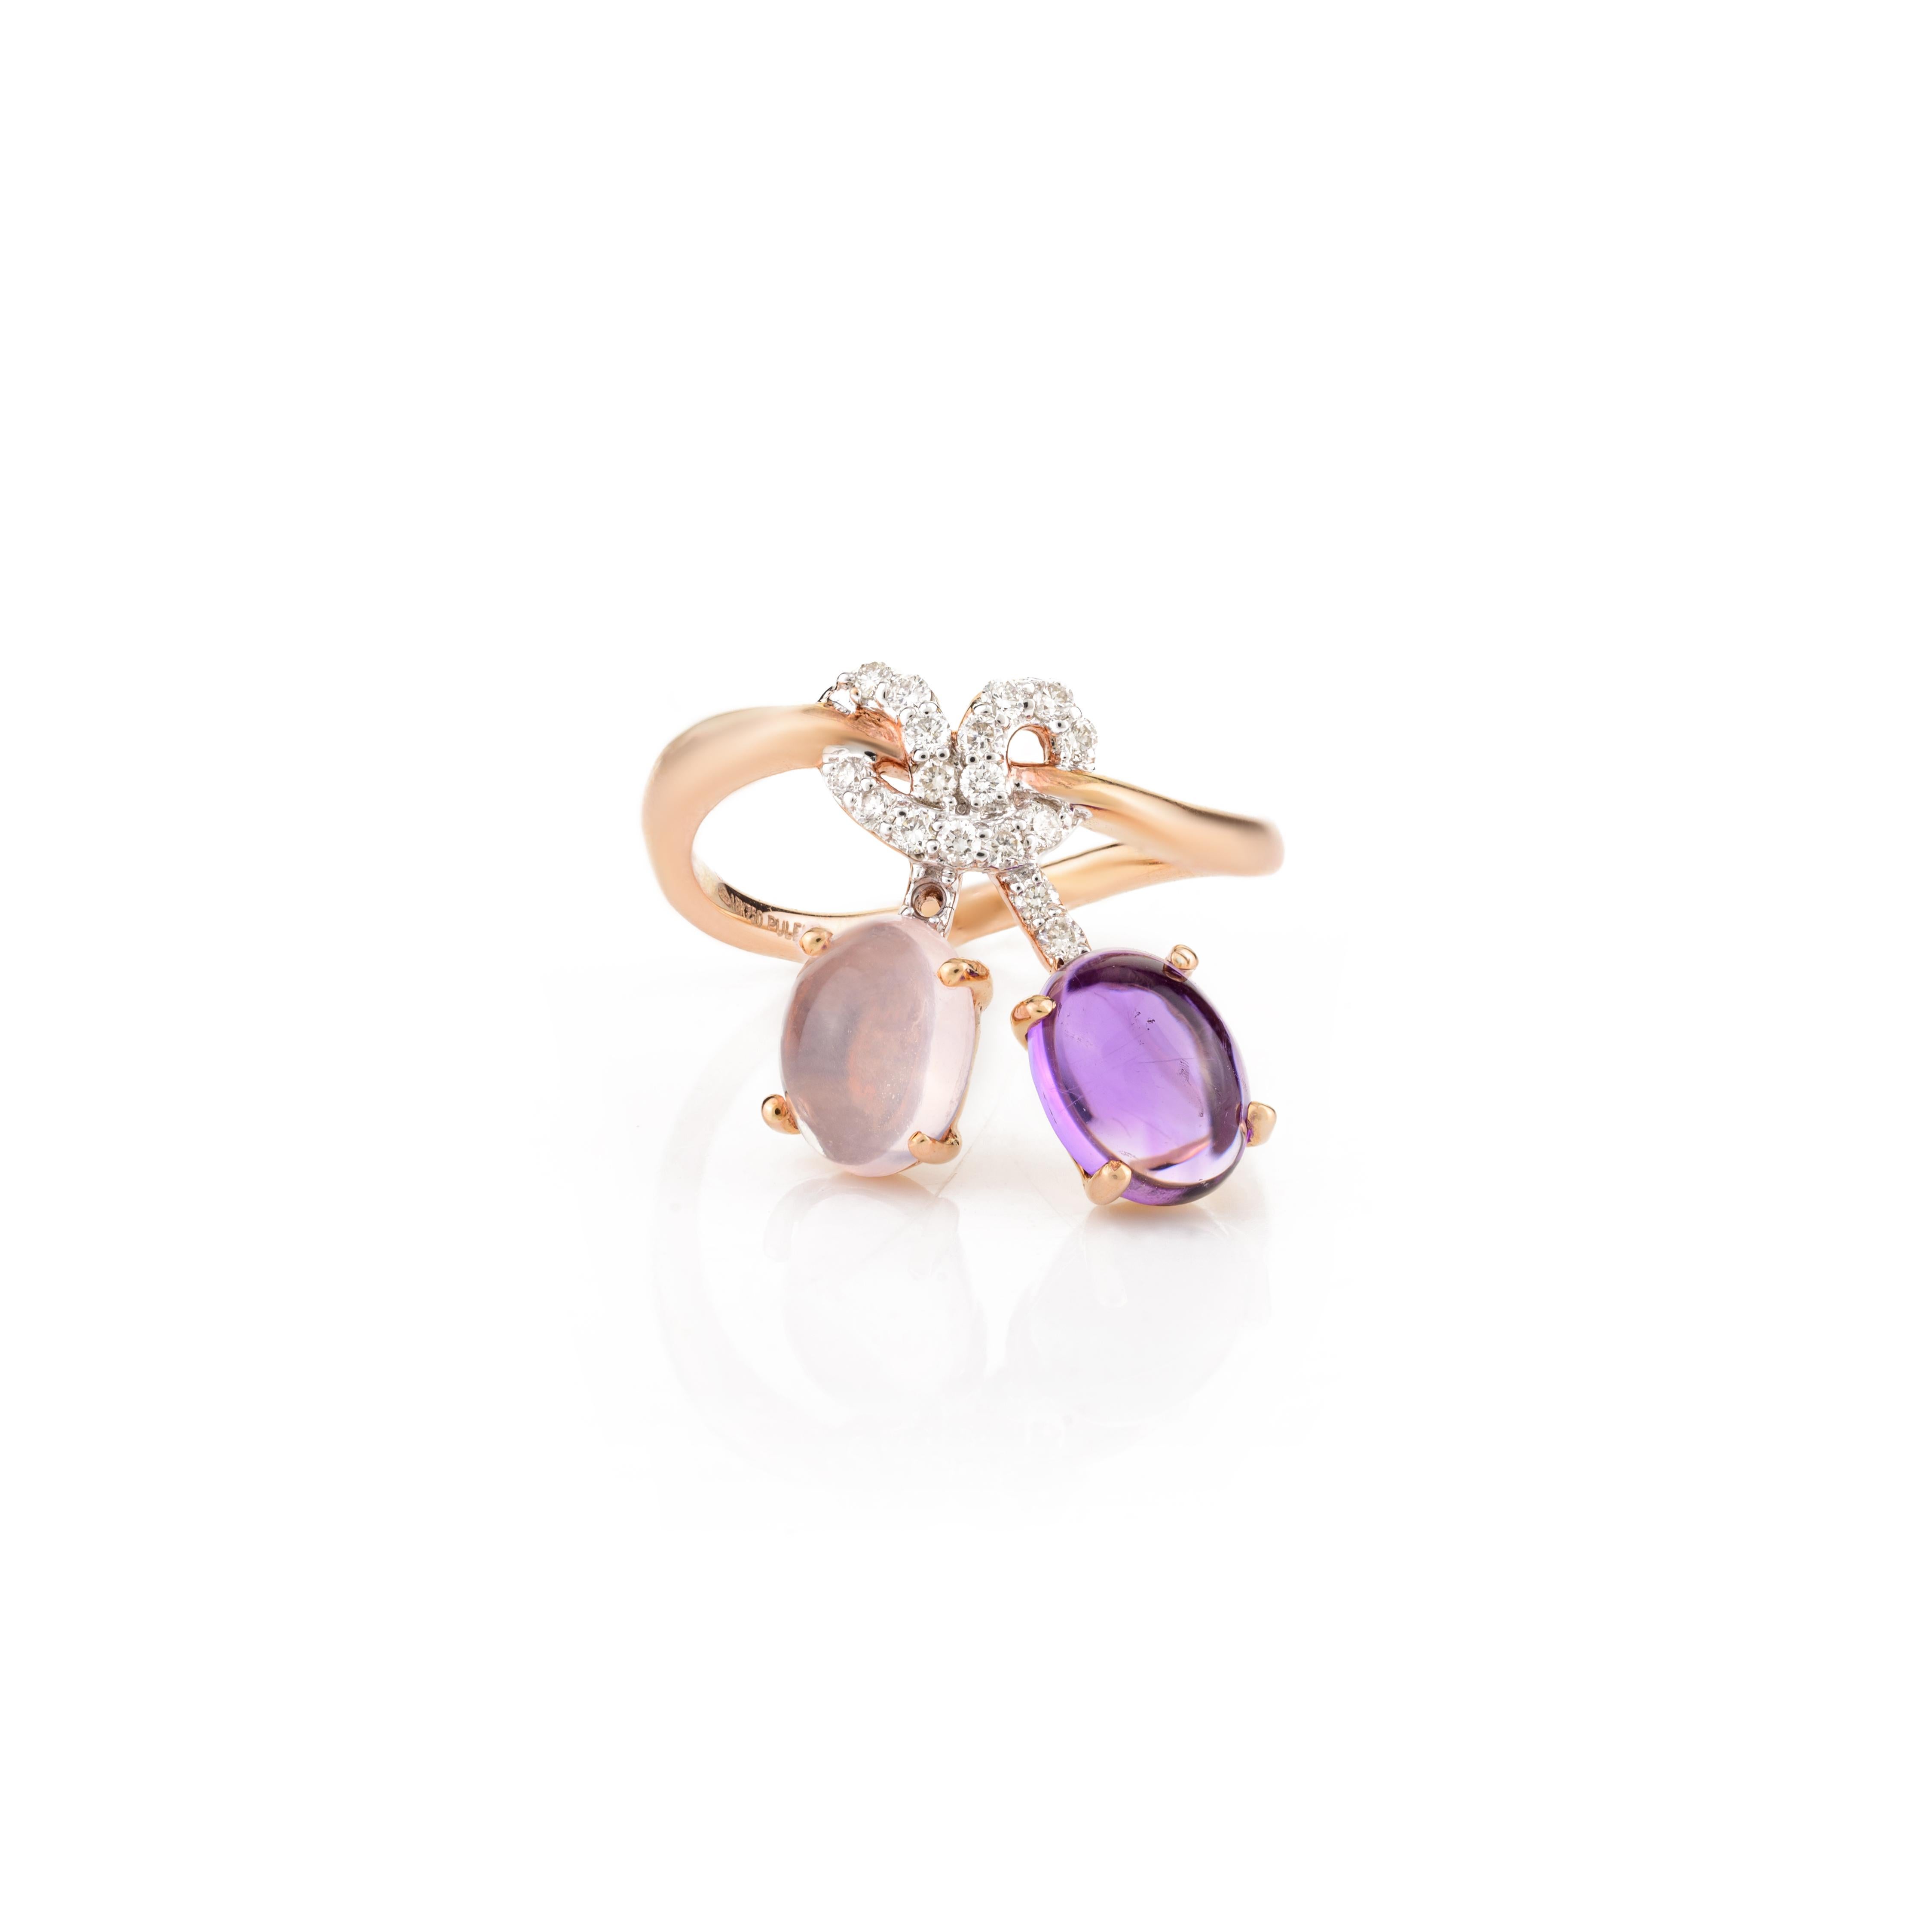 For Sale:  Statement Amethyst and Rose Quartz Ring with Diamond Bow 18k Solid Rose Gold 5